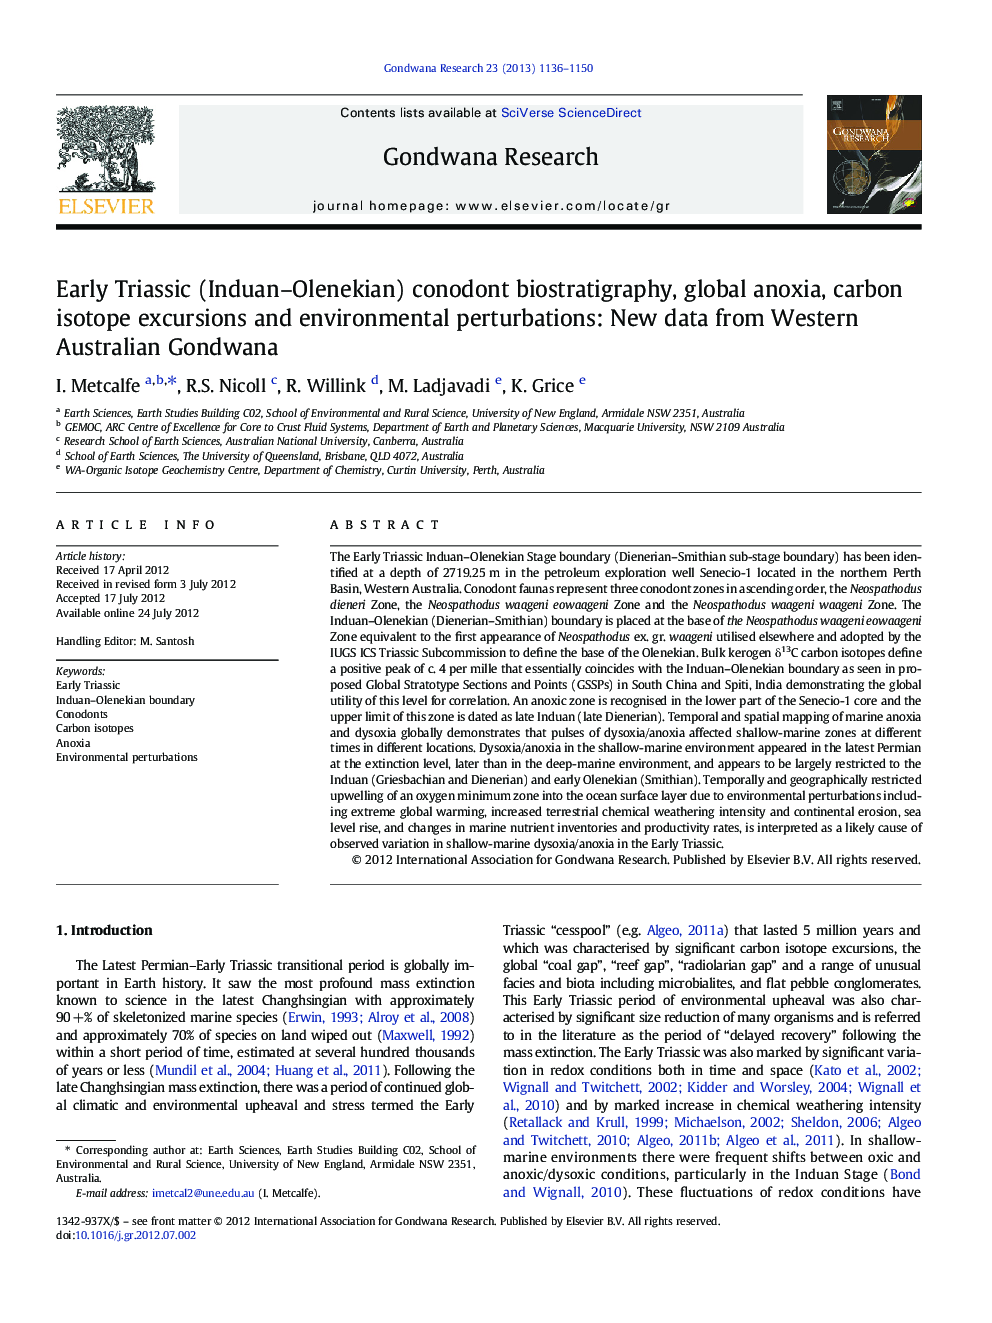 Early Triassic (Induan-Olenekian) conodont biostratigraphy, global anoxia, carbon isotope excursions and environmental perturbations: New data from Western Australian Gondwana